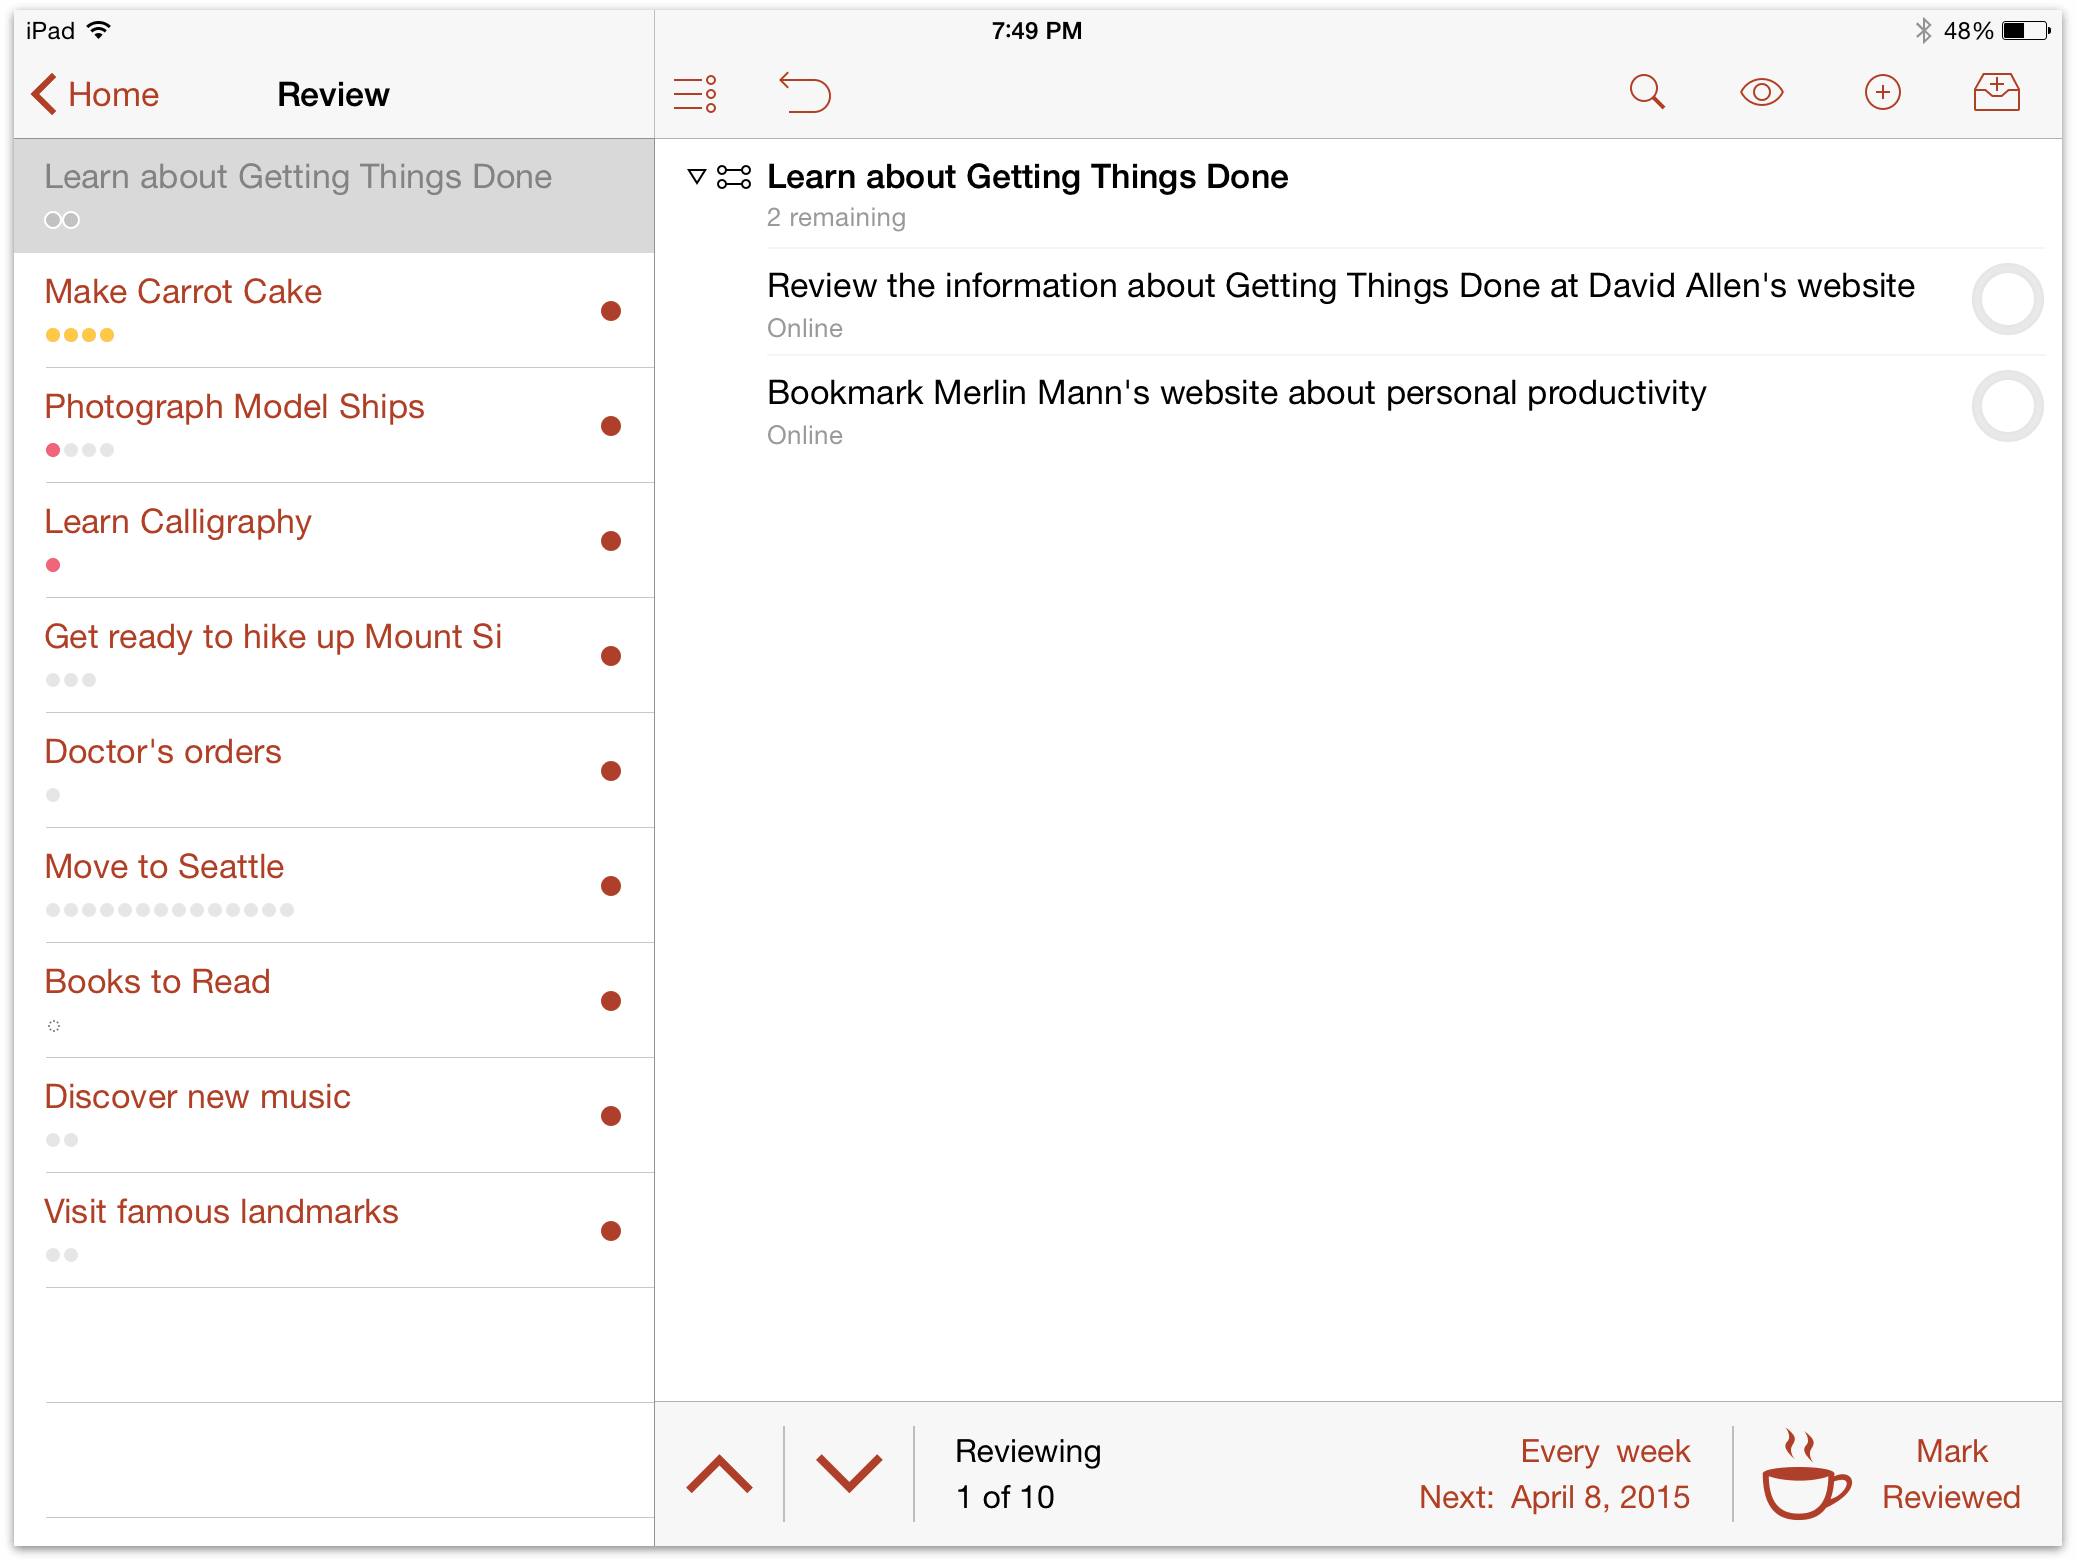 An example of the Review perspective in OmniFocus 2 for iOS on iPad.